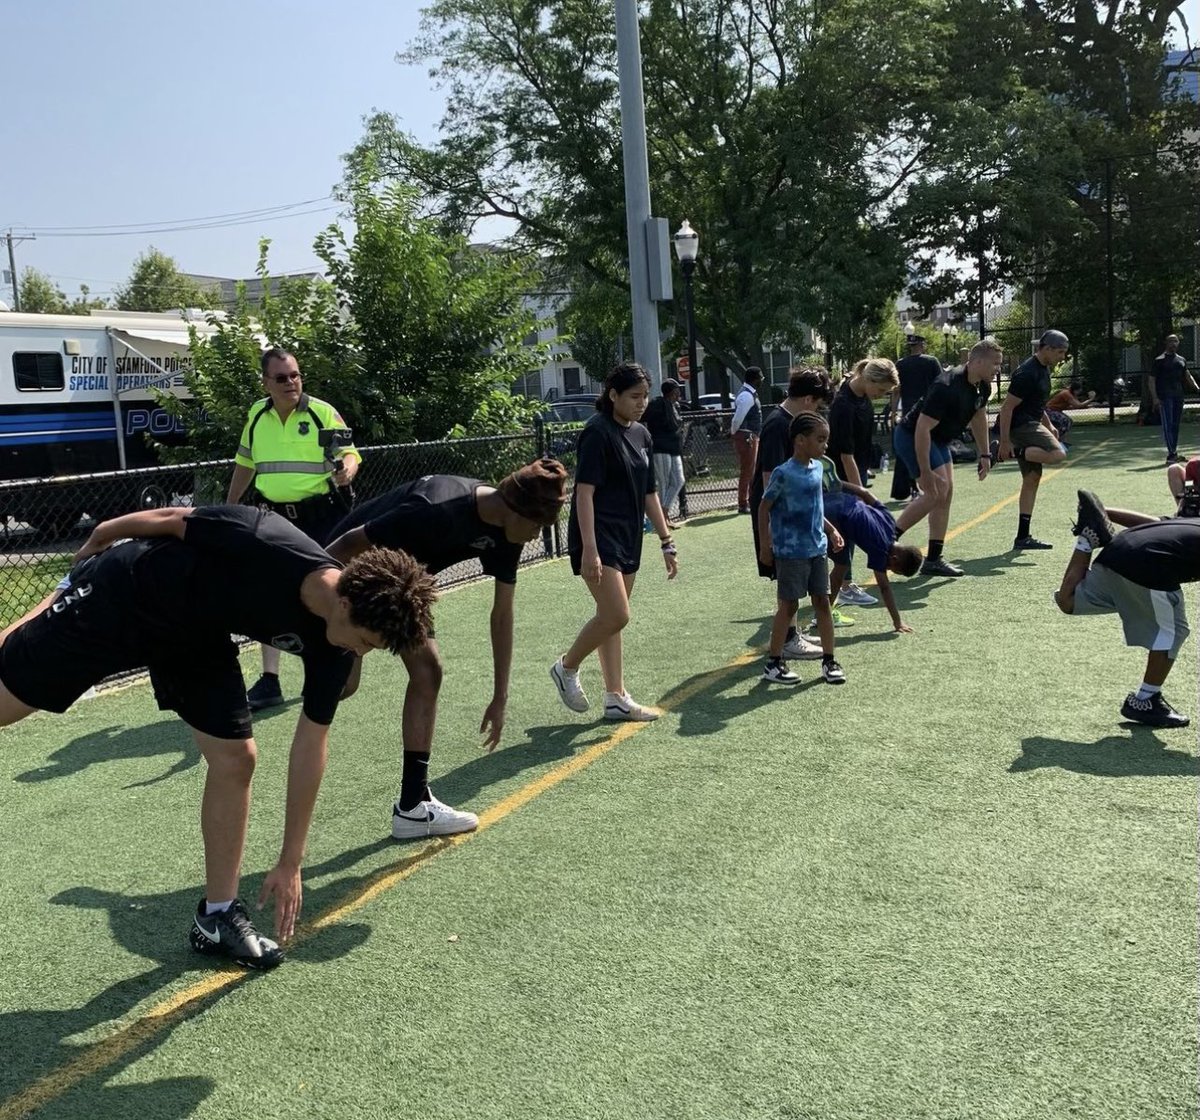 Great morning at Lione Park for Workout with the Chief with @StamfordPolice officers, Police Chief Tim Shaw, @BGCStamford, and students to promote mental health and wellness, community partnerships, and youth empowerment.